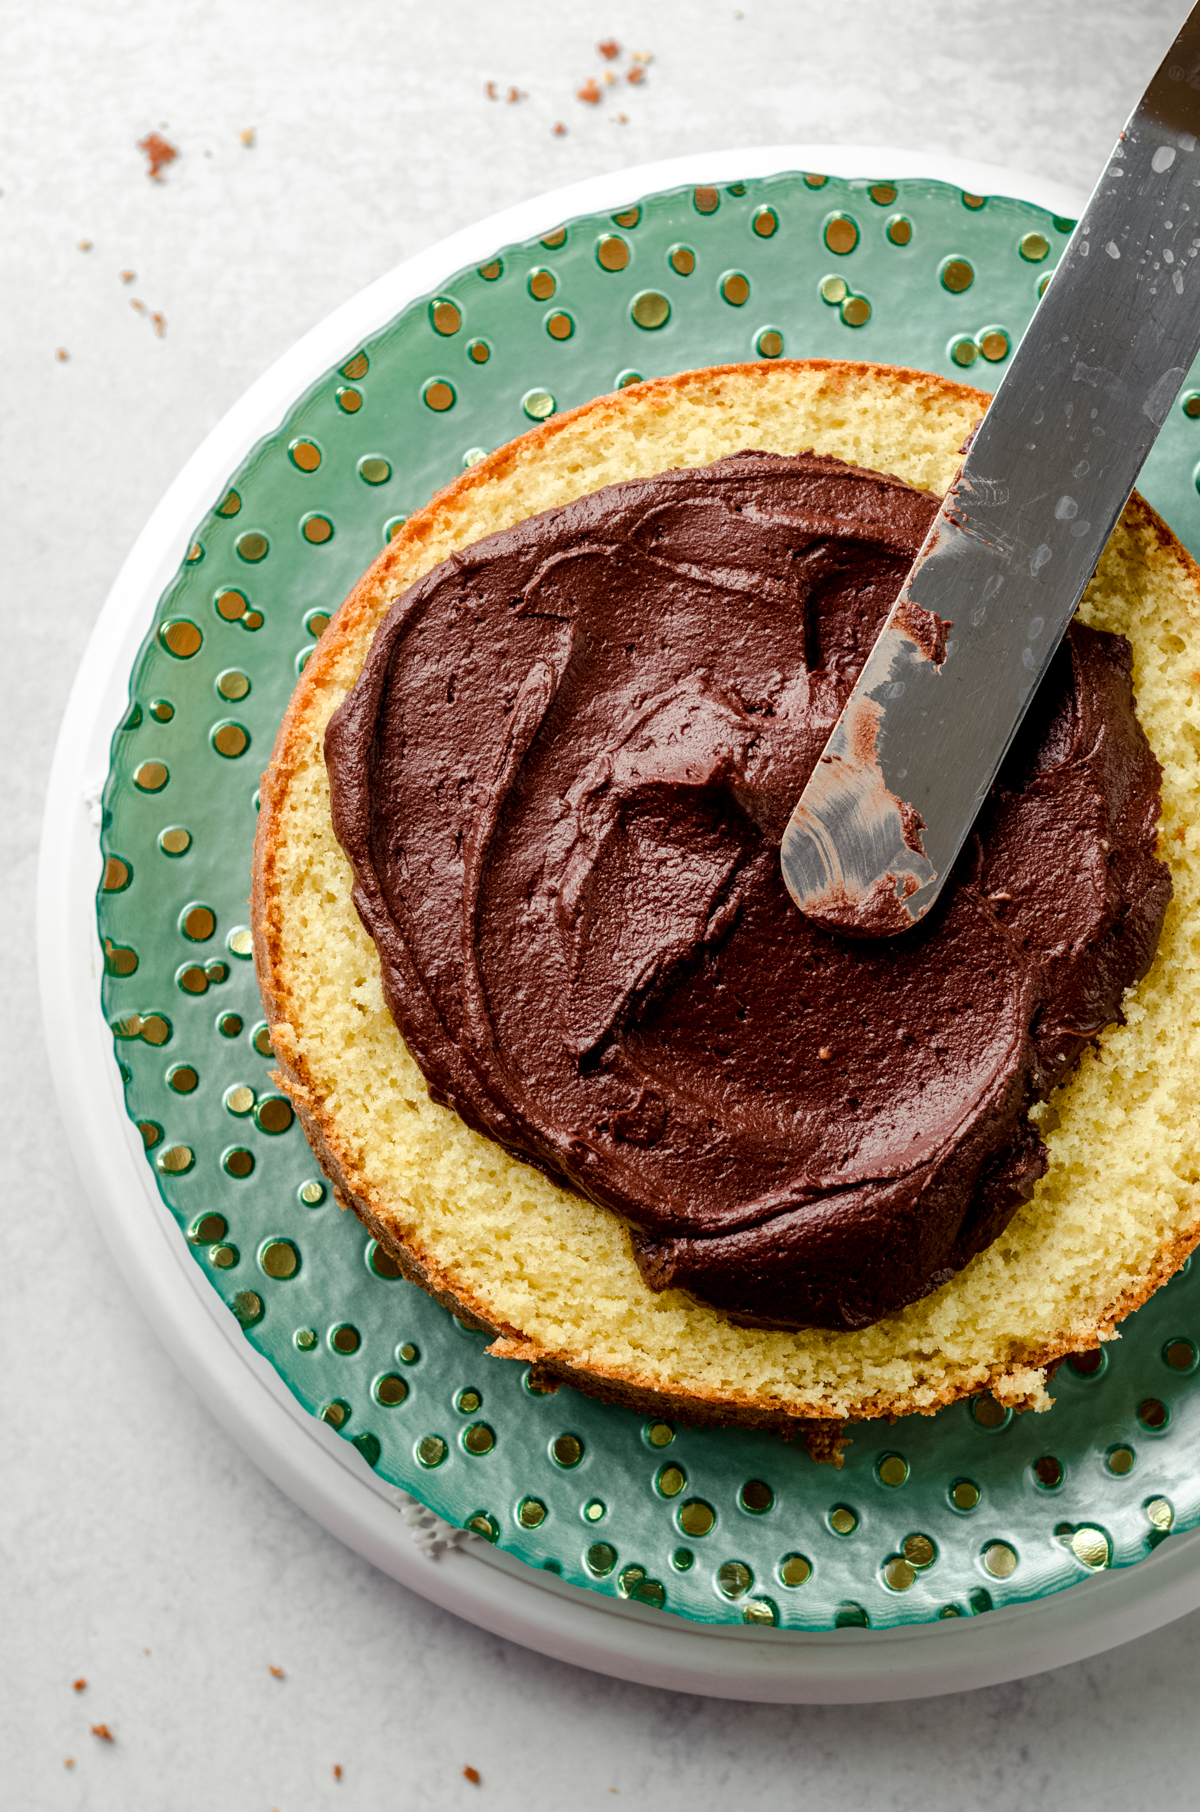 Aerial photo of someone using a spatula to spread chocolate frosting onto a layer of yellow cake.